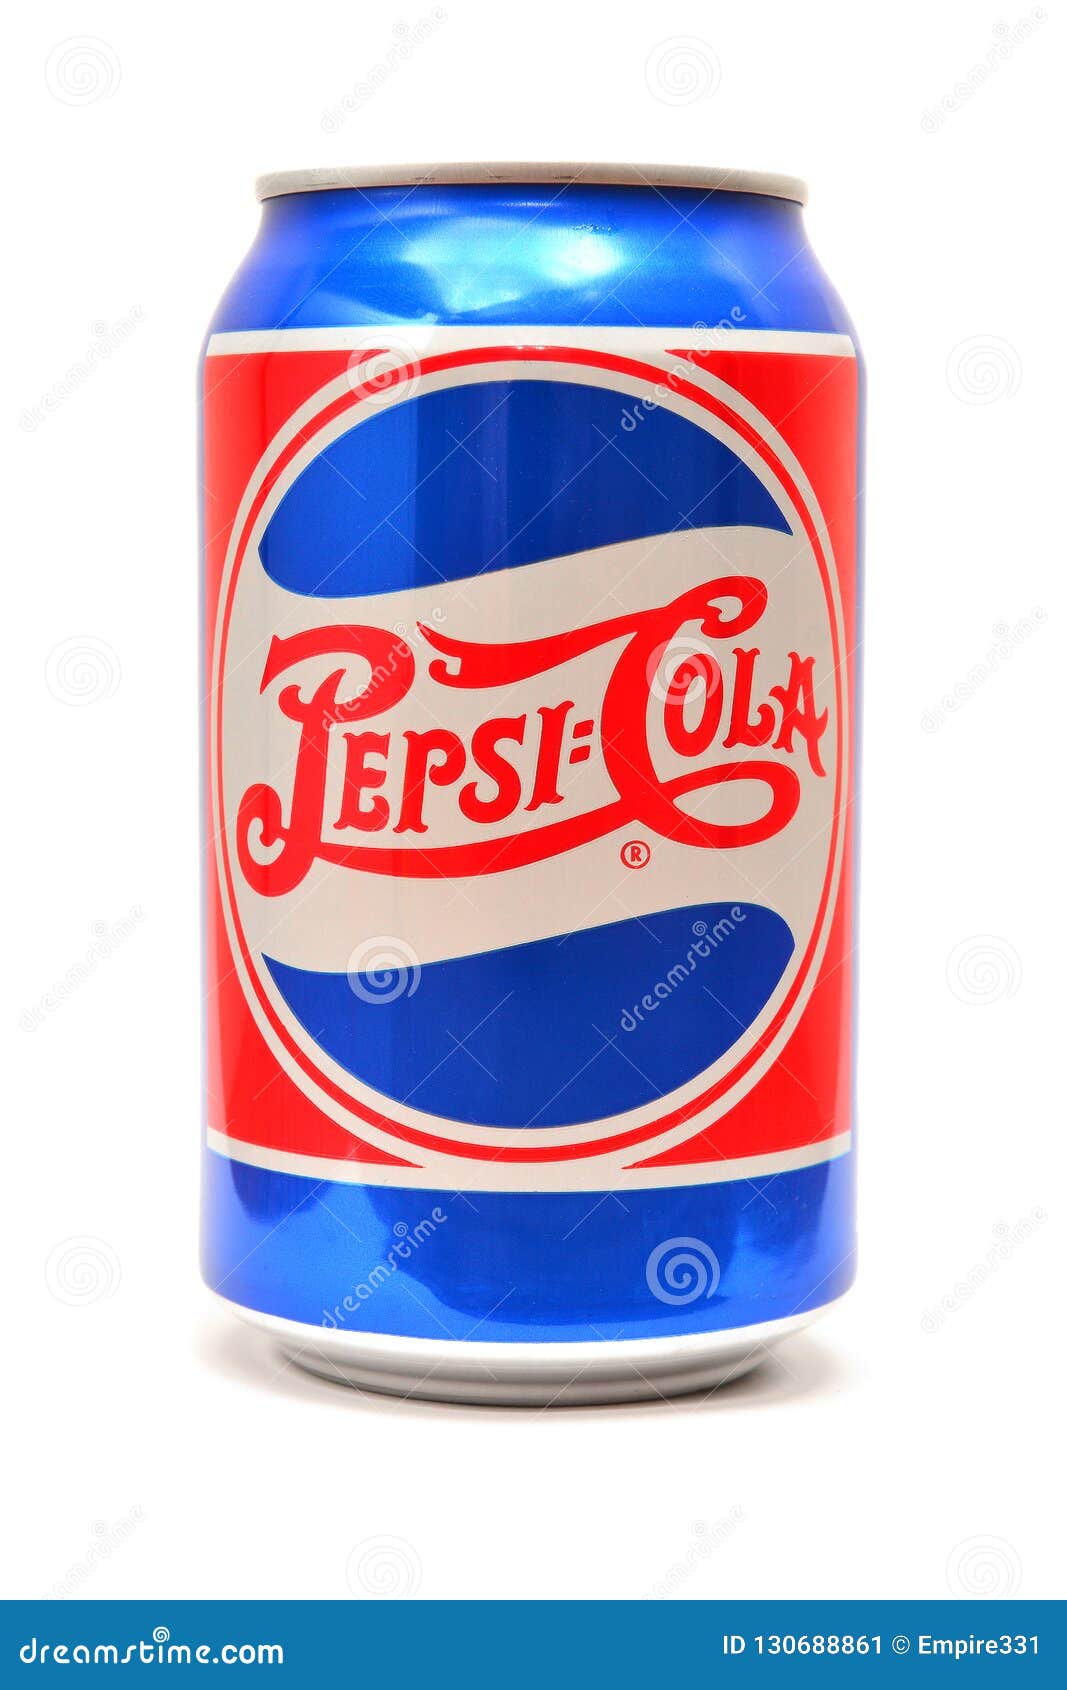 old pepsi can